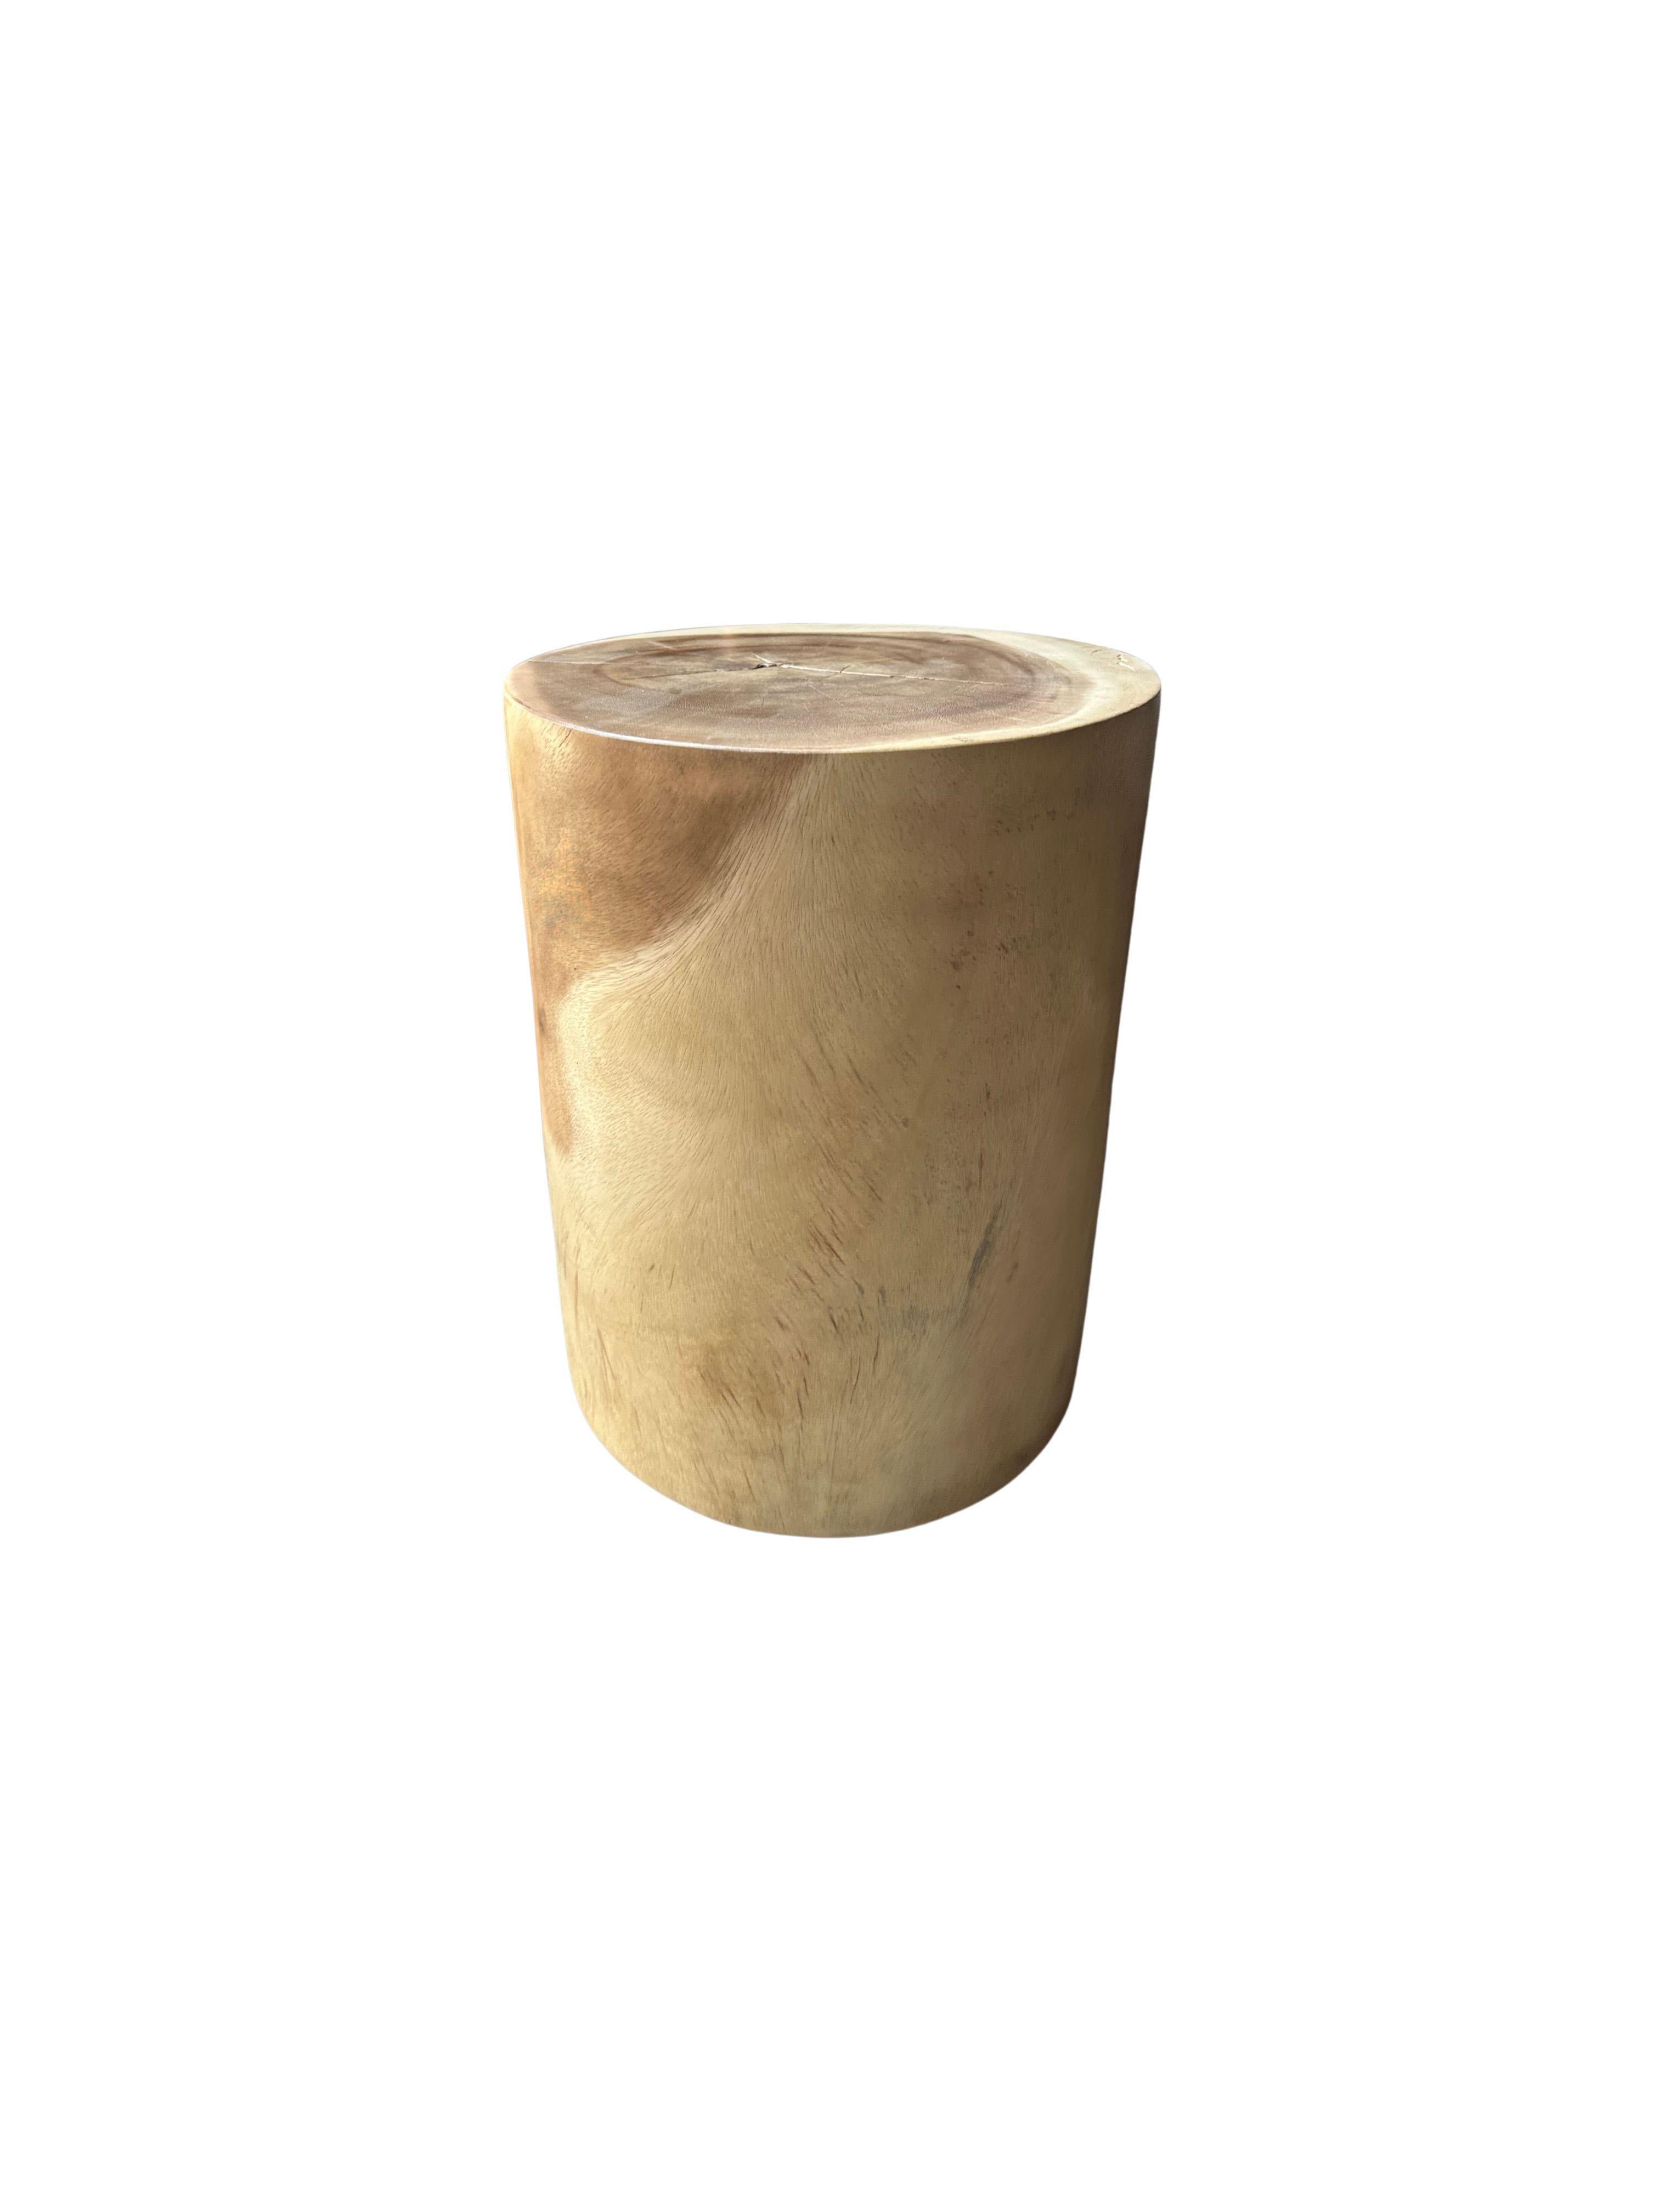 A wonderfully minimalist side table crafted from solid mango wood. Unique to Suar is its wood patterning and shades which are abstract and contrasting. Hand-crafted by local artisans this is the perfect object to bring warmth to any space. 